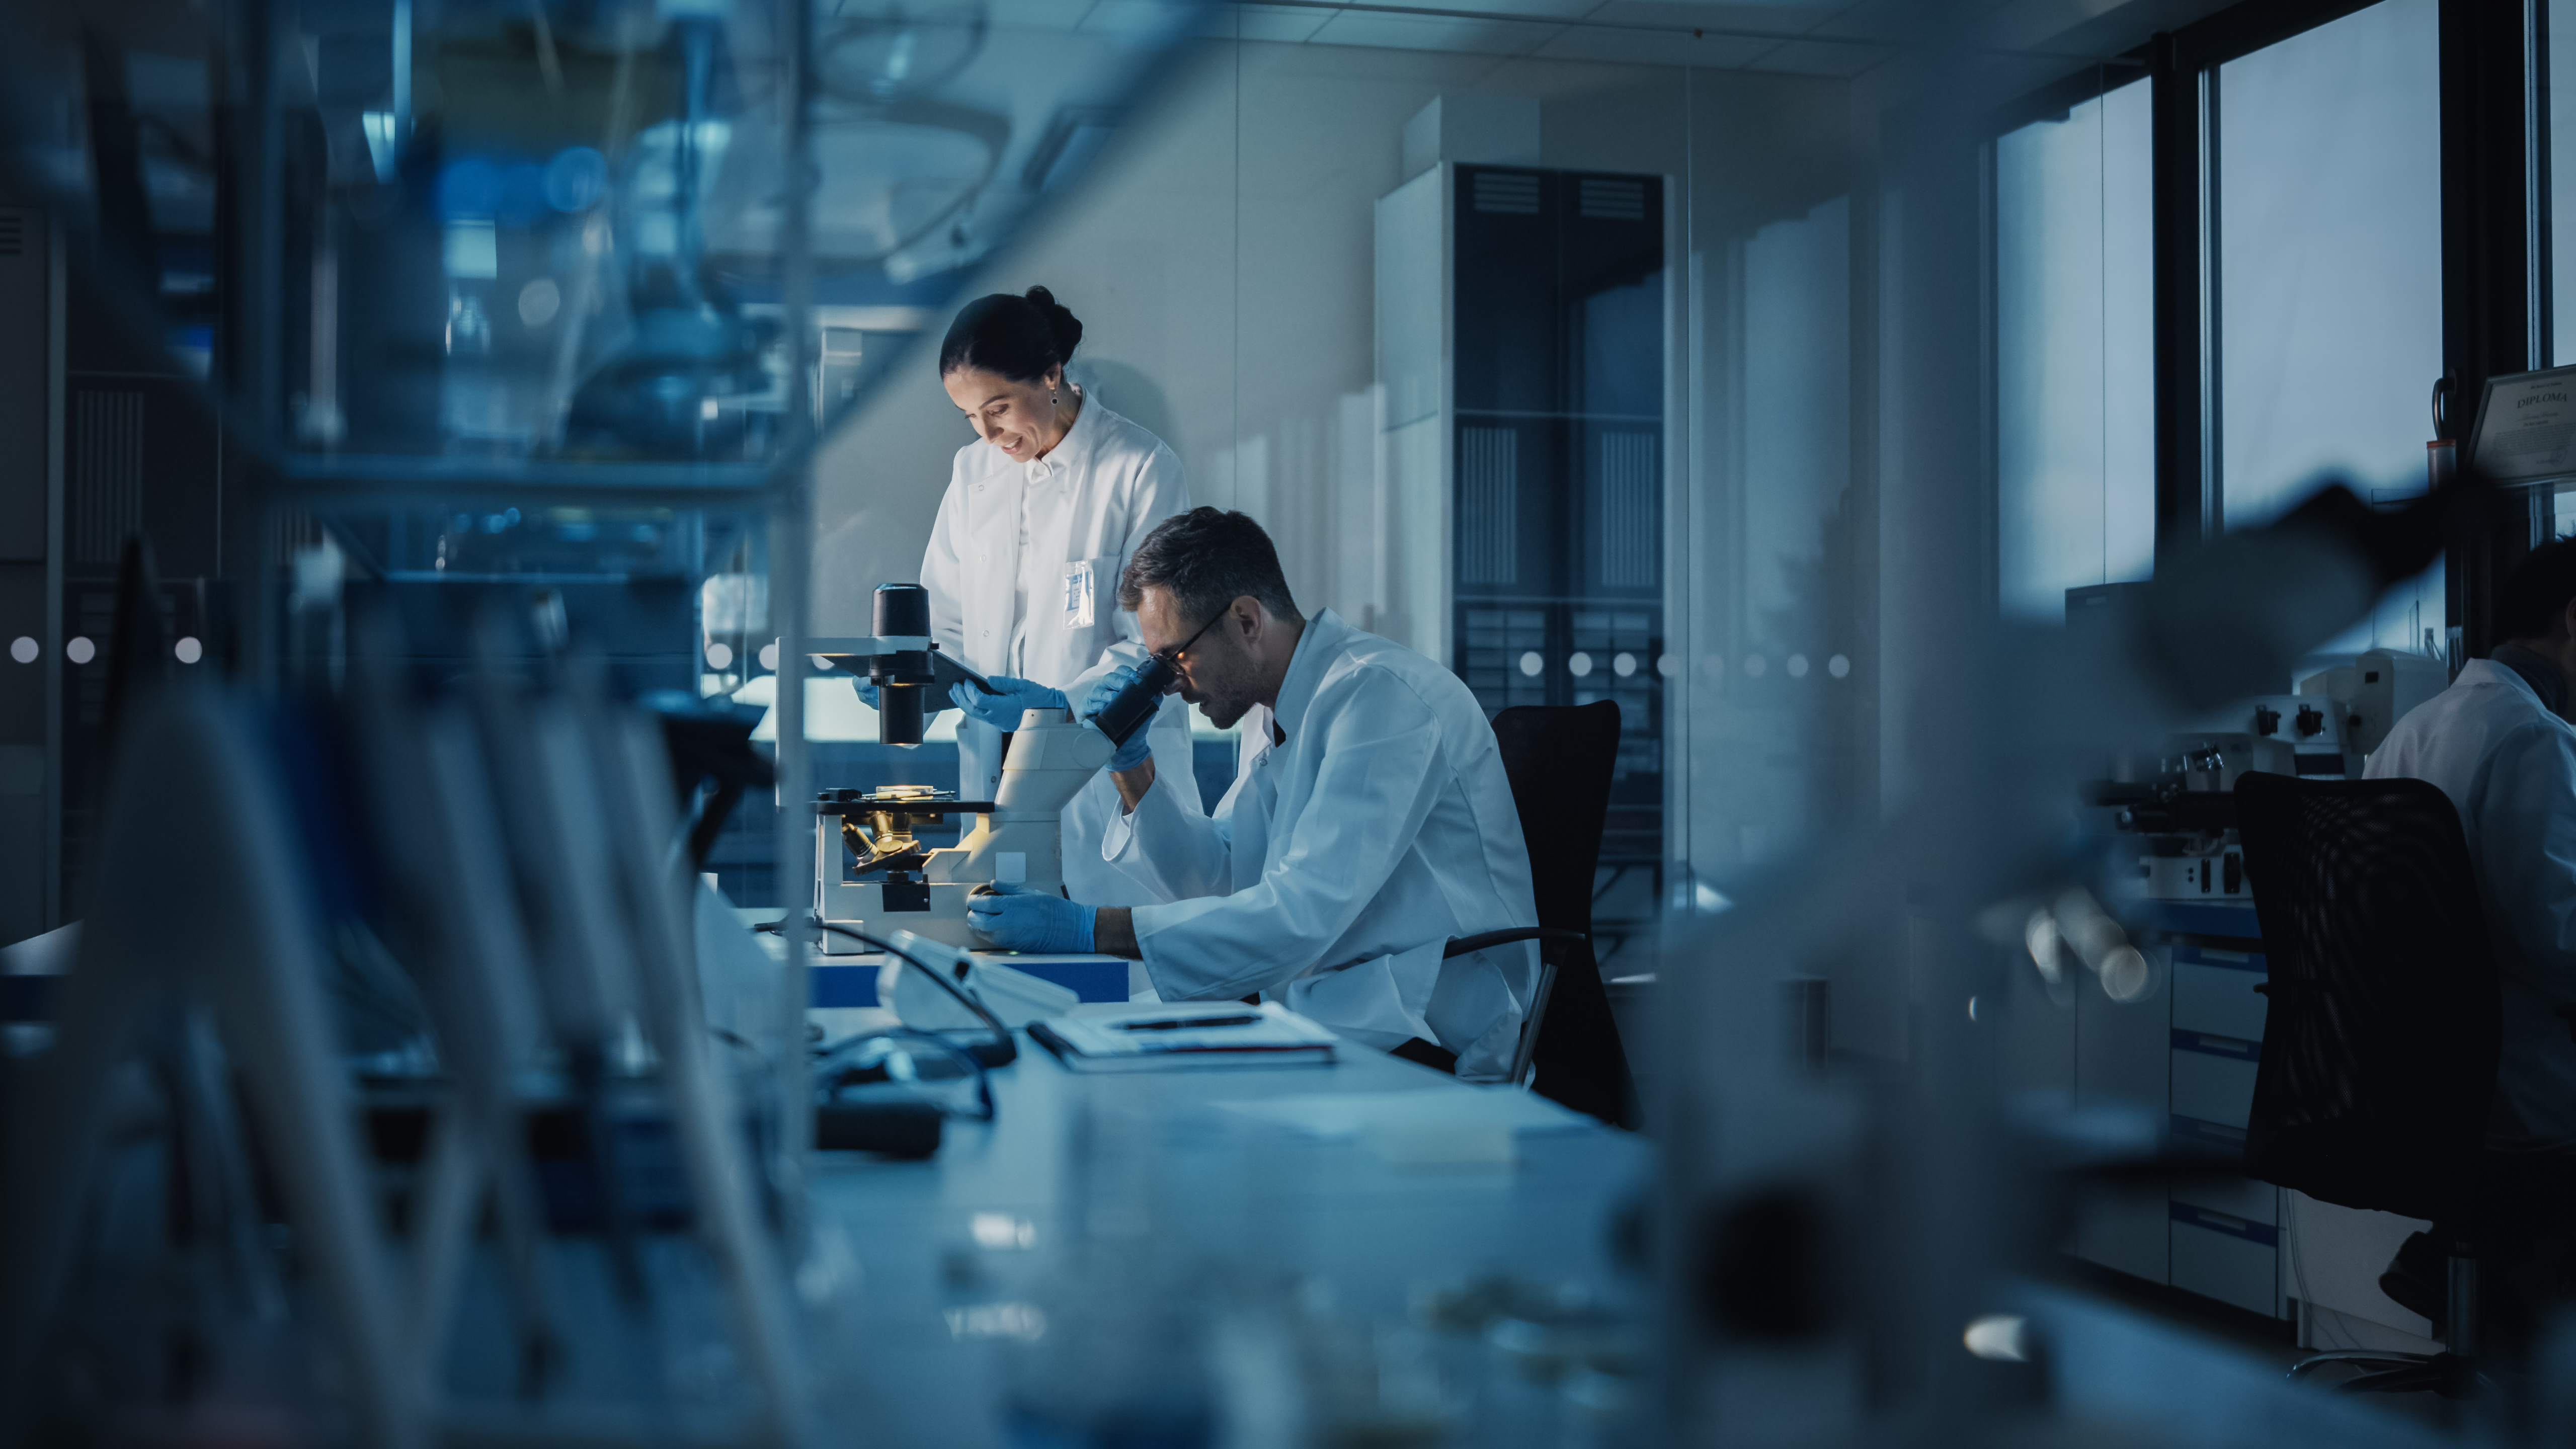 Researchers working in lab